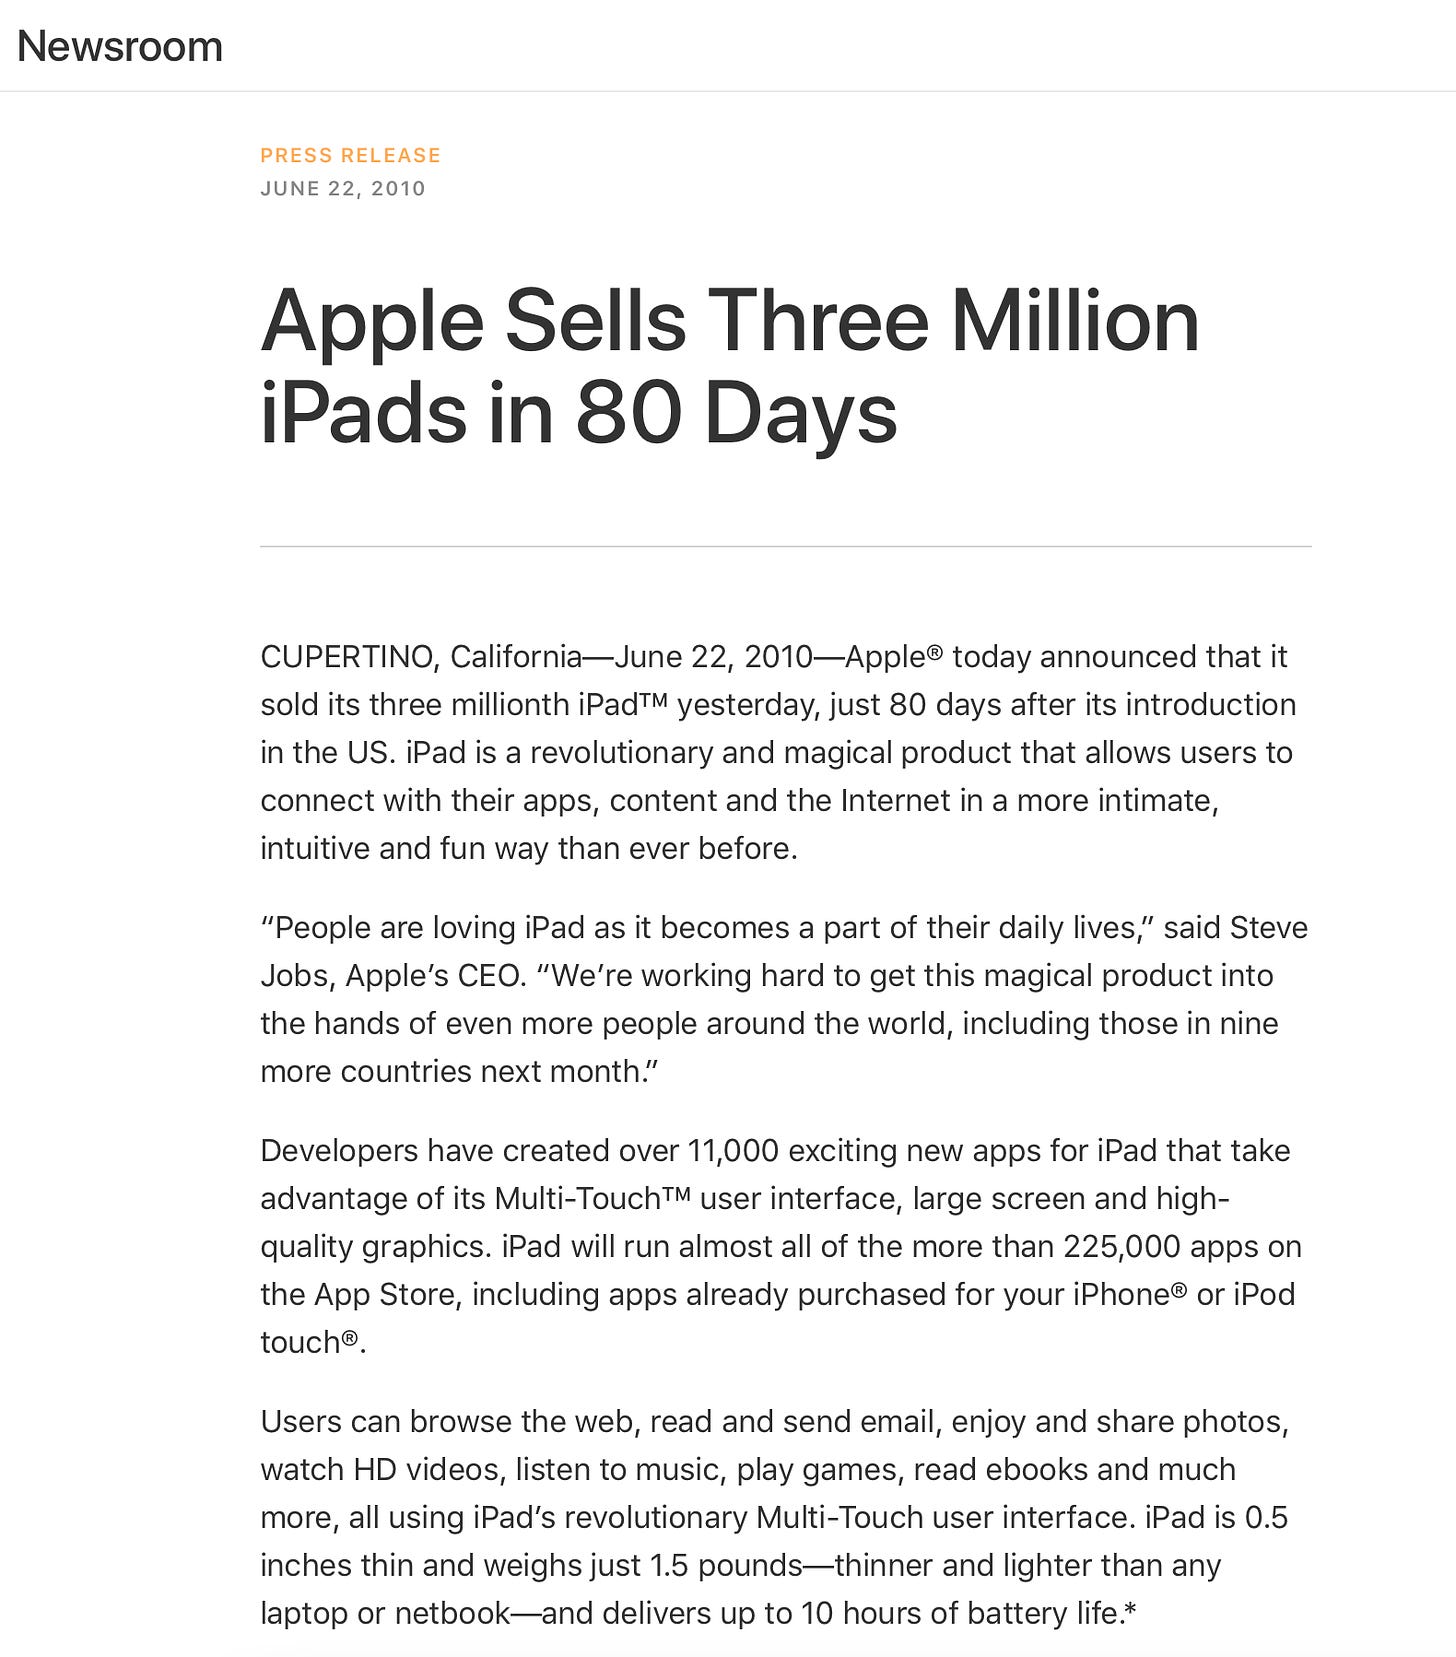 Apple Sells Three Million iPads in 80 Days CUPERTINO, California-June 22, 2010-Apple® today announced that it sold its three millionth iPad™ yesterday, just 80 days after its introduction in the US. iPad is a revolutionary and magical product that allows users to connect with their apps, content and the Internet in a more intimate, intuitive and fun way than ever before. "People are loving iPad as it becomes a part of their daily lives," said Steve Jobs, Apple's CEO. "We're working hard to get this magical product into the hands of even more people around the world, including those in nine more countries next month." Developers have created over 11,000 exciting new apps for iPad that take advantage of its Multi-Touch™M user interface, large screen and high-quality graphics. iPad will run almost all of the more than 225,000 apps on the App Store, including apps already purchased for your iPhone® or iPod touch®. Users can browse the web, read and send email, enjoy and share photos, watch HD videos, listen to music, play games, read ebooks and much more, all using iPad's revolutionary Multi-Touch user interface. iPad is 0.5 inches thin and weighs just 1.5 pounds-thinner and lighter than any laptop or netbook-and delivers up to 10 hours of battery life.*